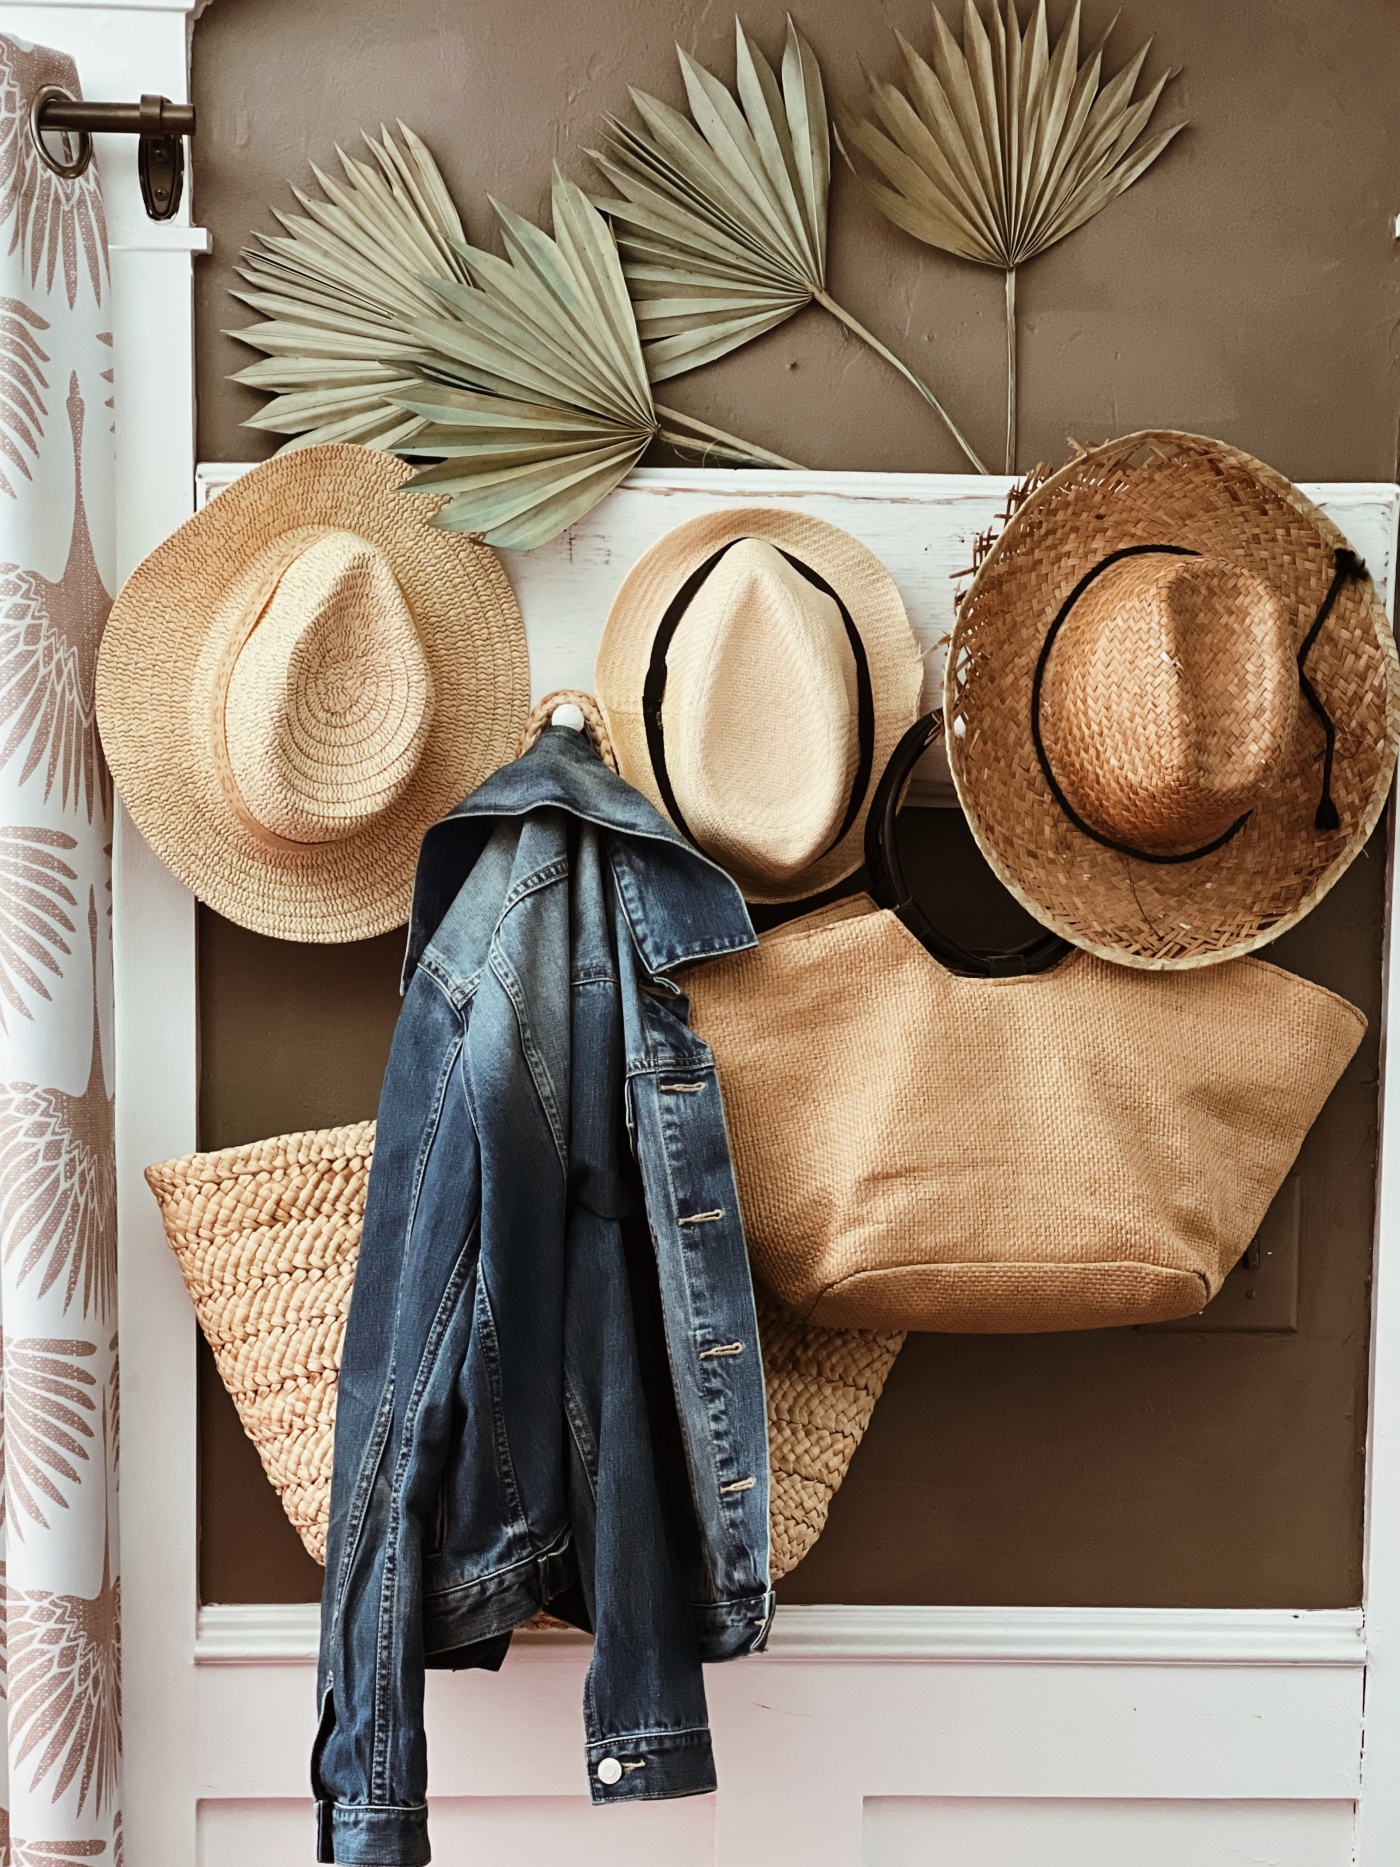 Straw Hats & Straw Bags - Buy, Wear, and Use as Home Decor